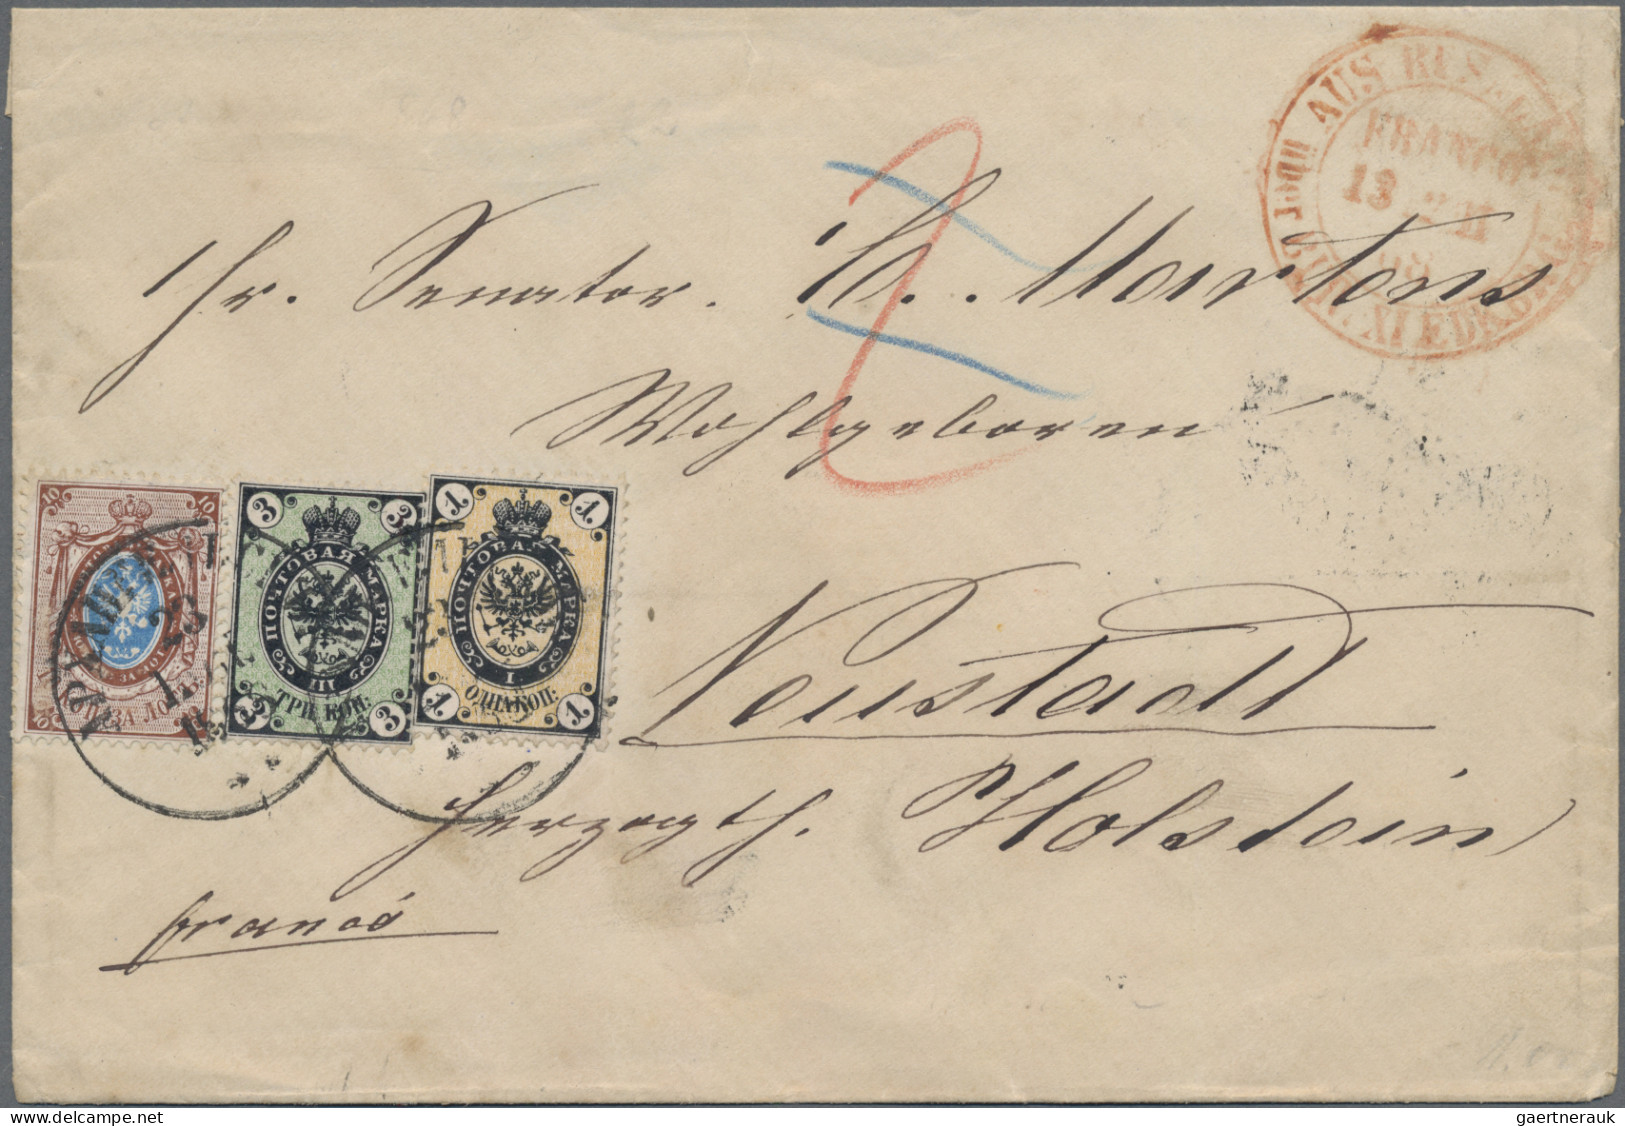 Russia: 1868 Cover From Archangelsk To Neustadt, Germany Franked By 1866 1k., 3k - Covers & Documents